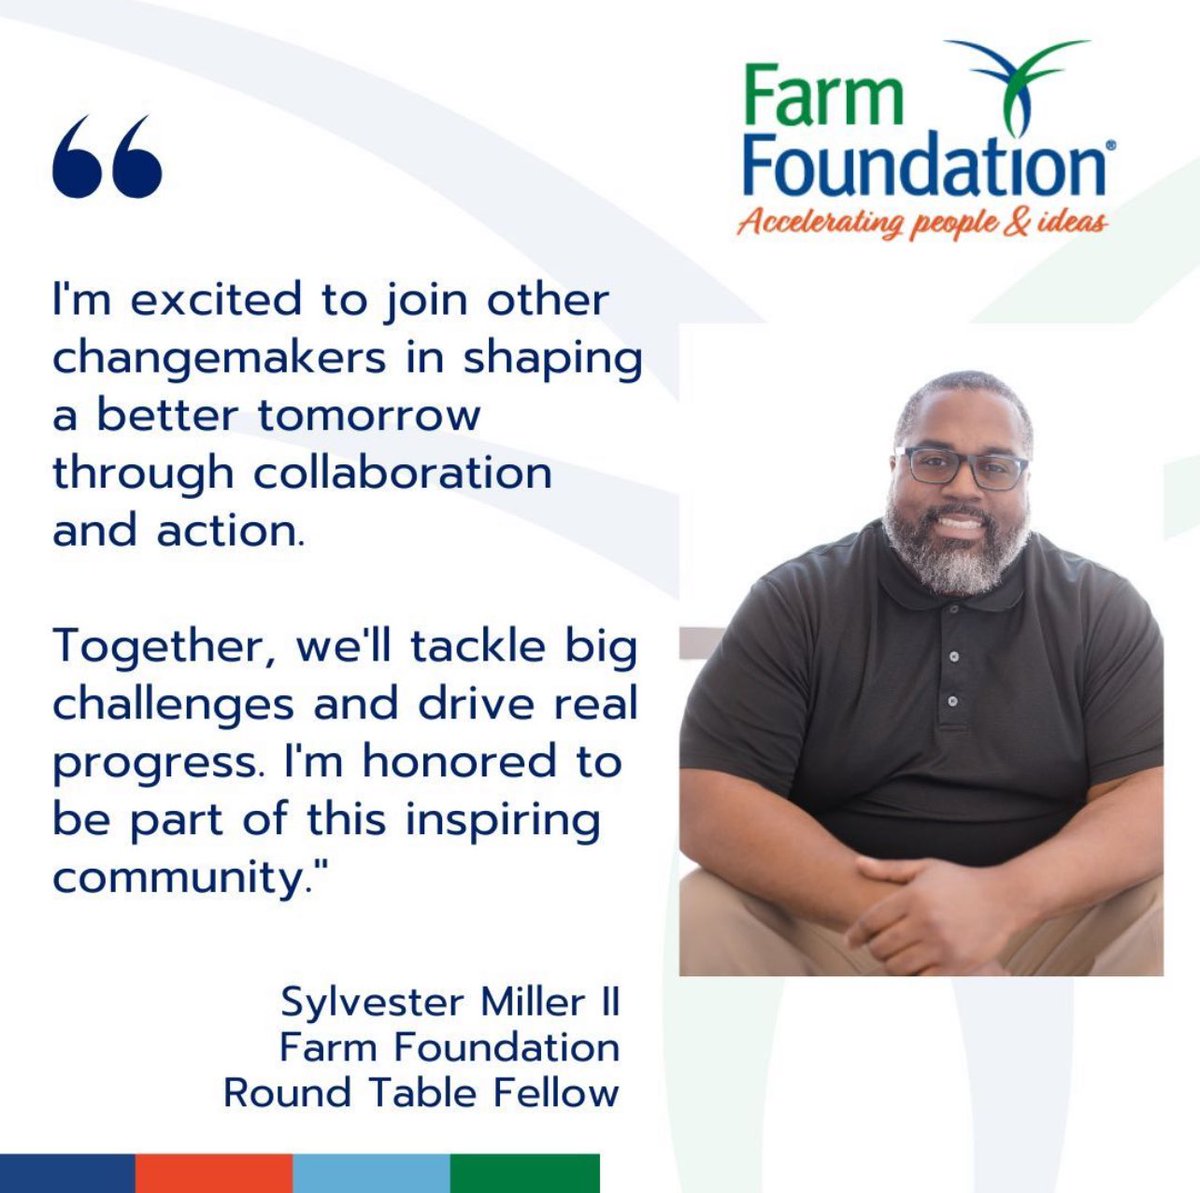 @FarmFoundation I am honored and grateful for the invitation to become a Round Table Fellow. This opportunity is truly exciting, and I look forward to contributing to and learning from such a distinguished group. Thank you once again for this recognition and trust.